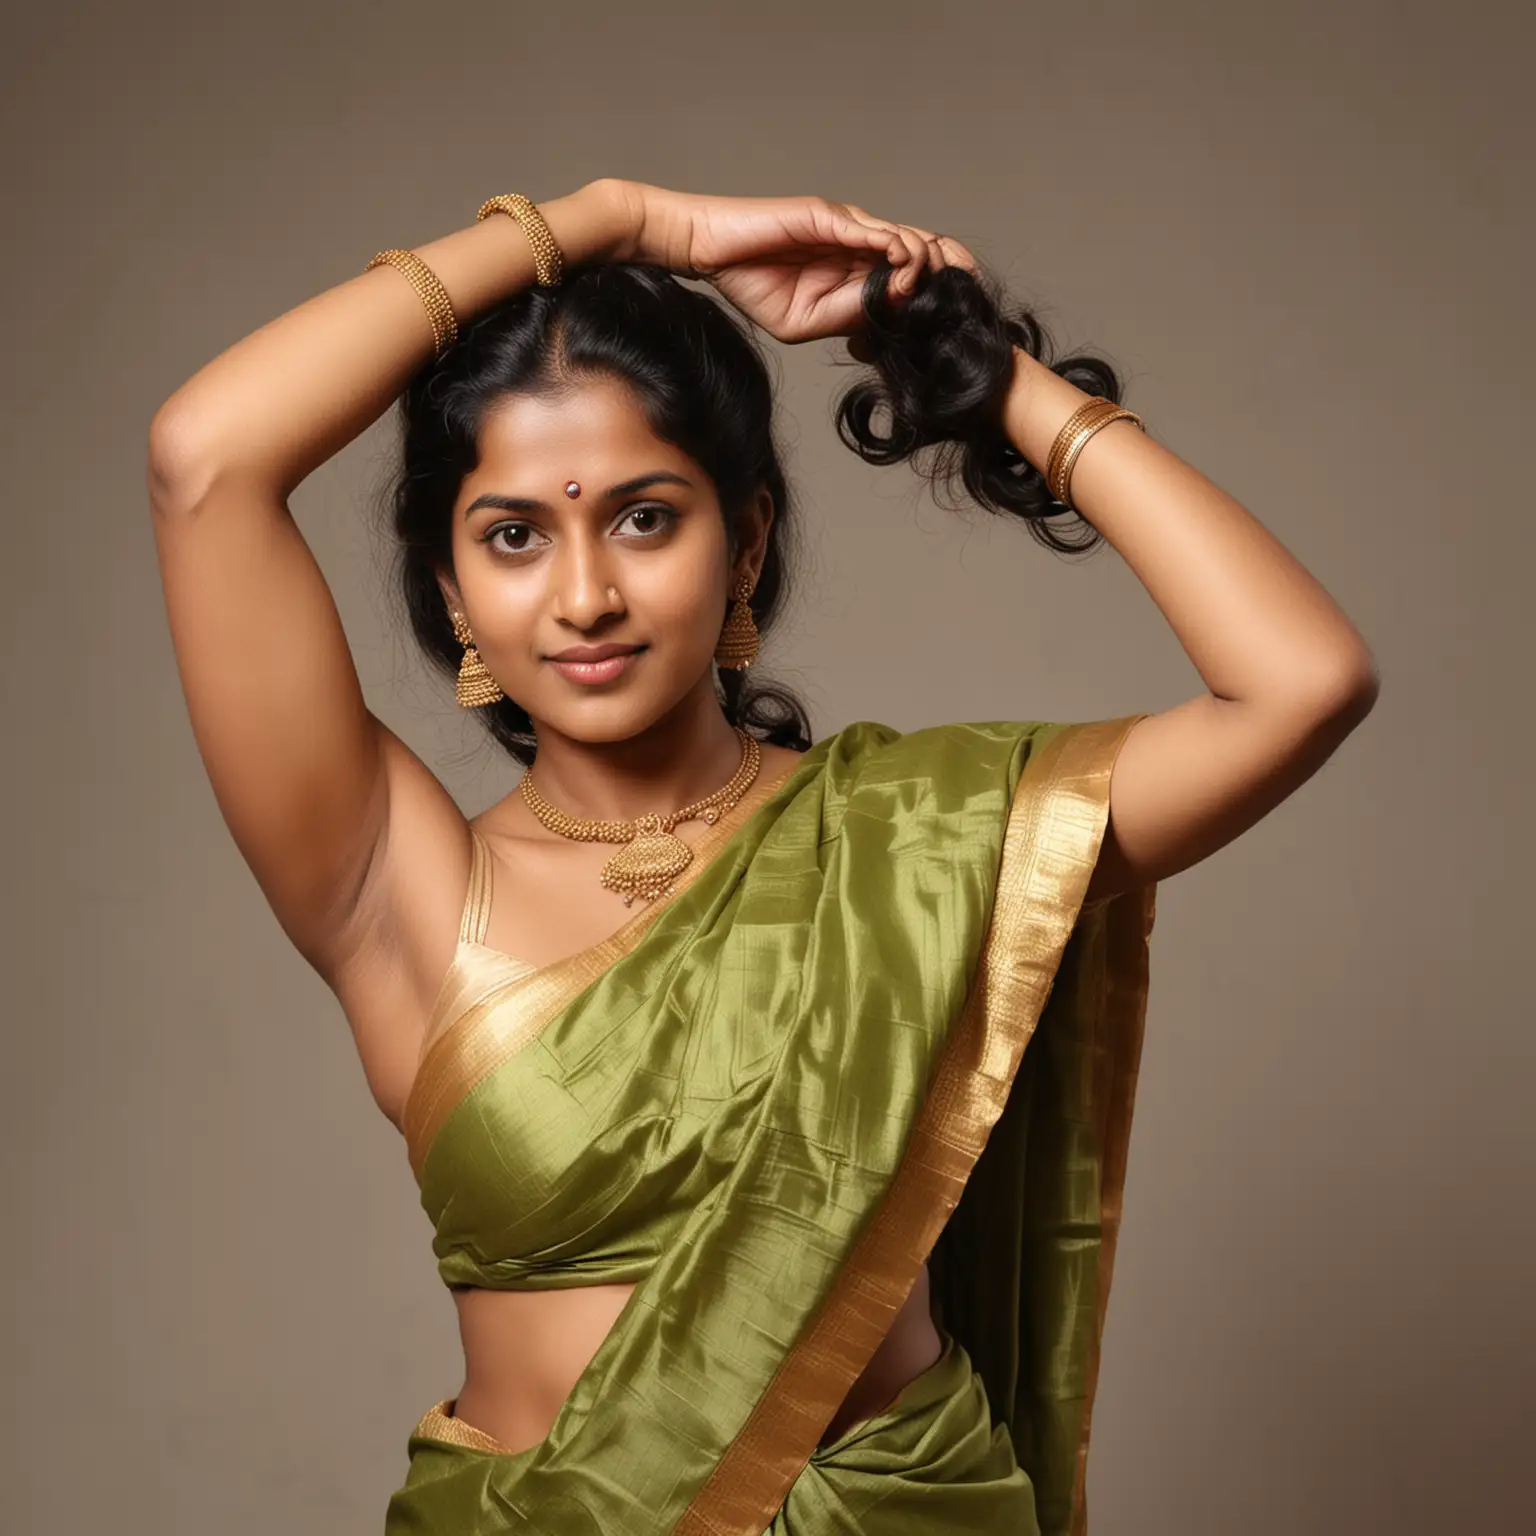 South Indian married women in age 30's in sleeveless blowse and Kerala saree with full hands raised and holding the back of head and tender unshaved hair in armpits, and cleavage, make it look traditional.